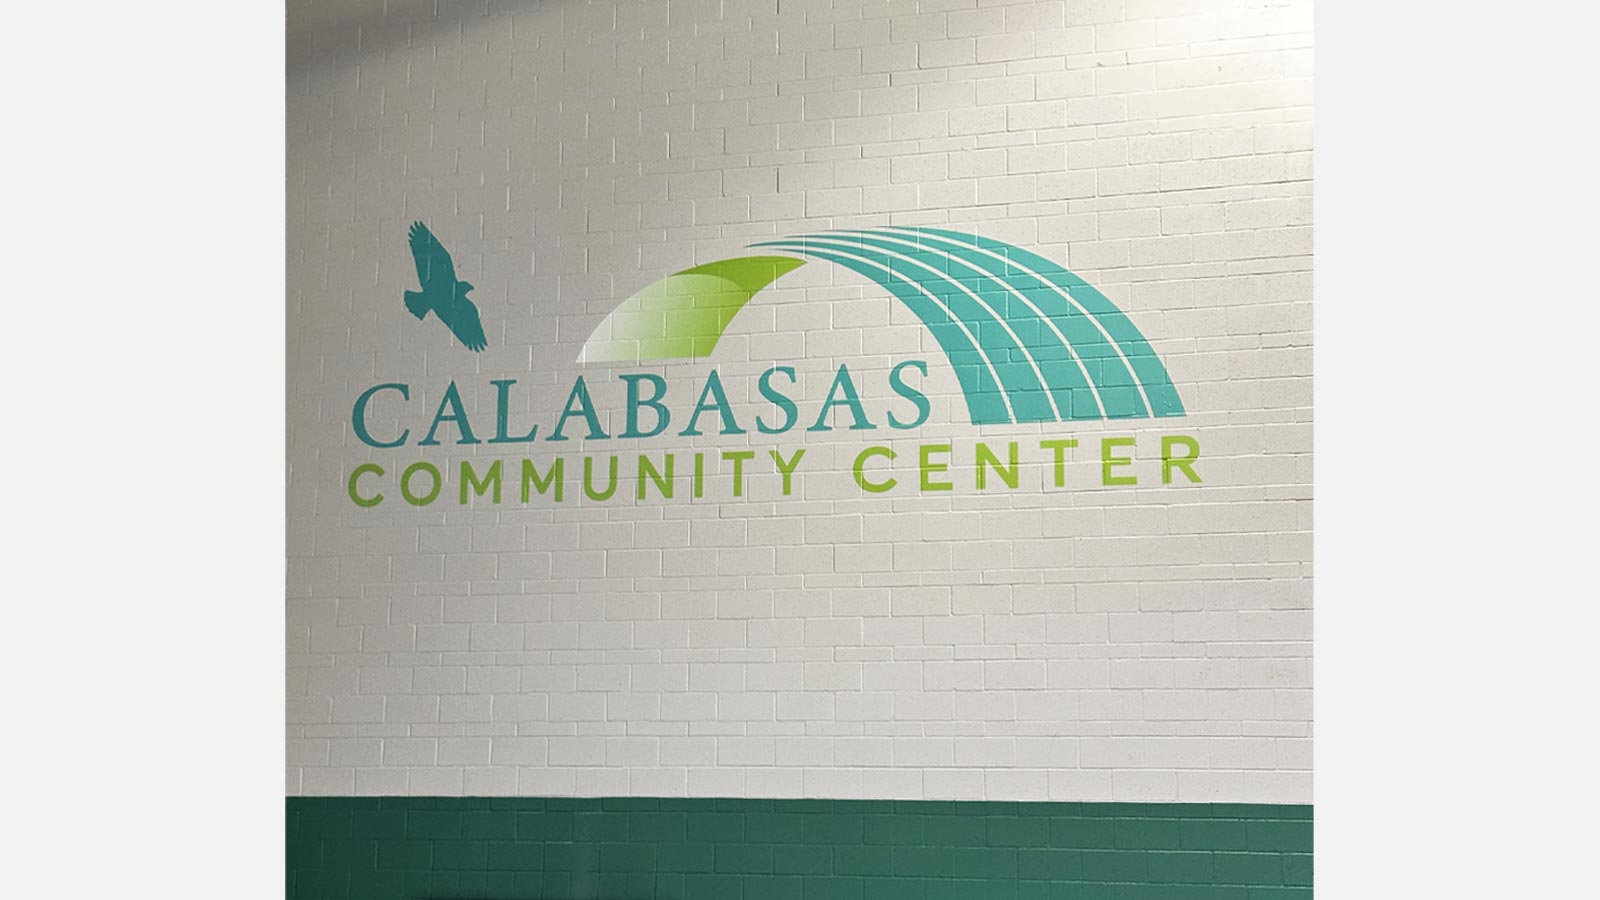 city of calabasas vinyl lettering applied to the wall